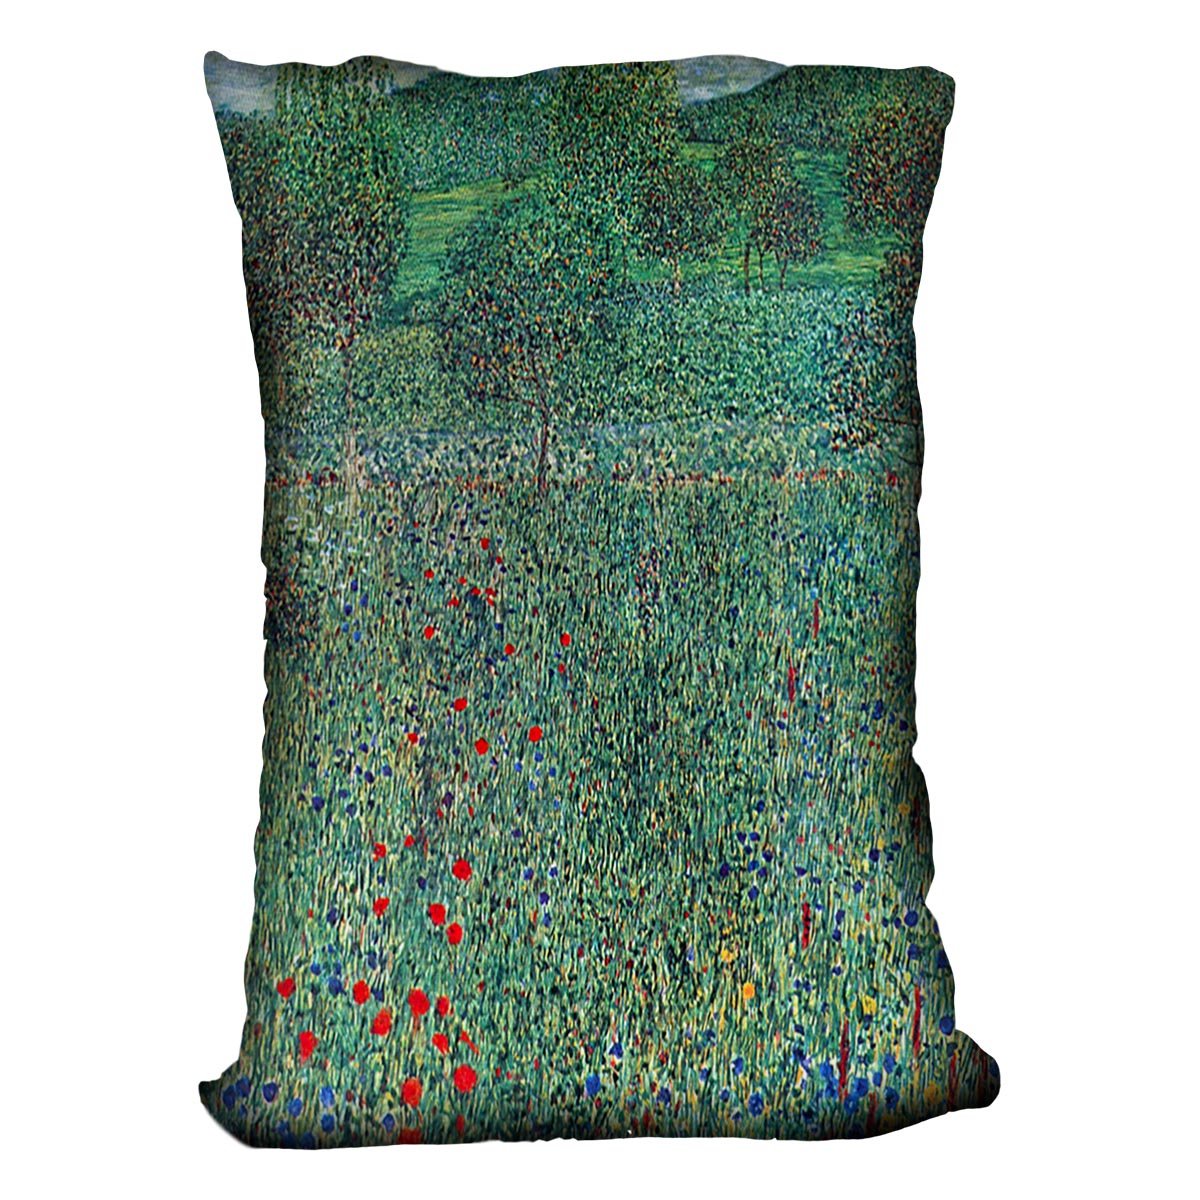 Female act with Animals by Klimt Throw Pillow